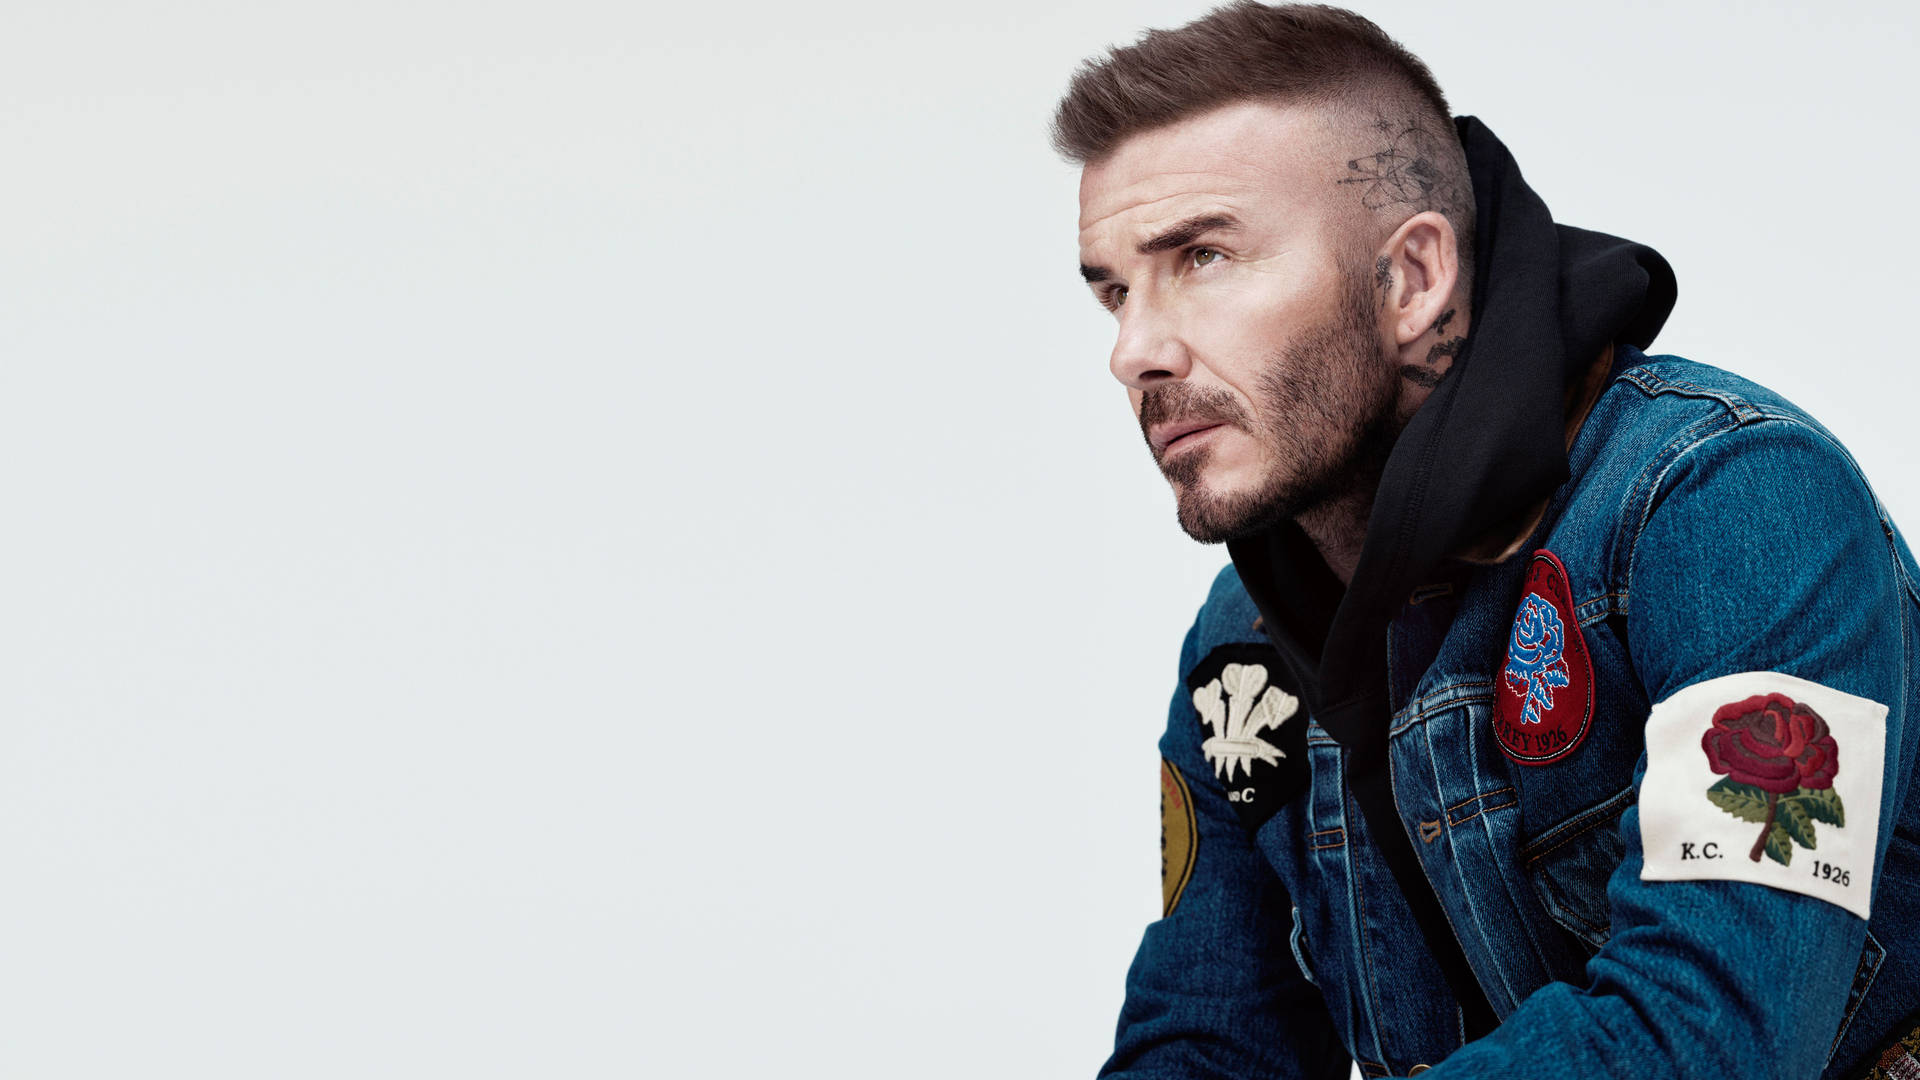 David Beckham Looking Stylish In A Kent & Curwen Suit And Glasses Background